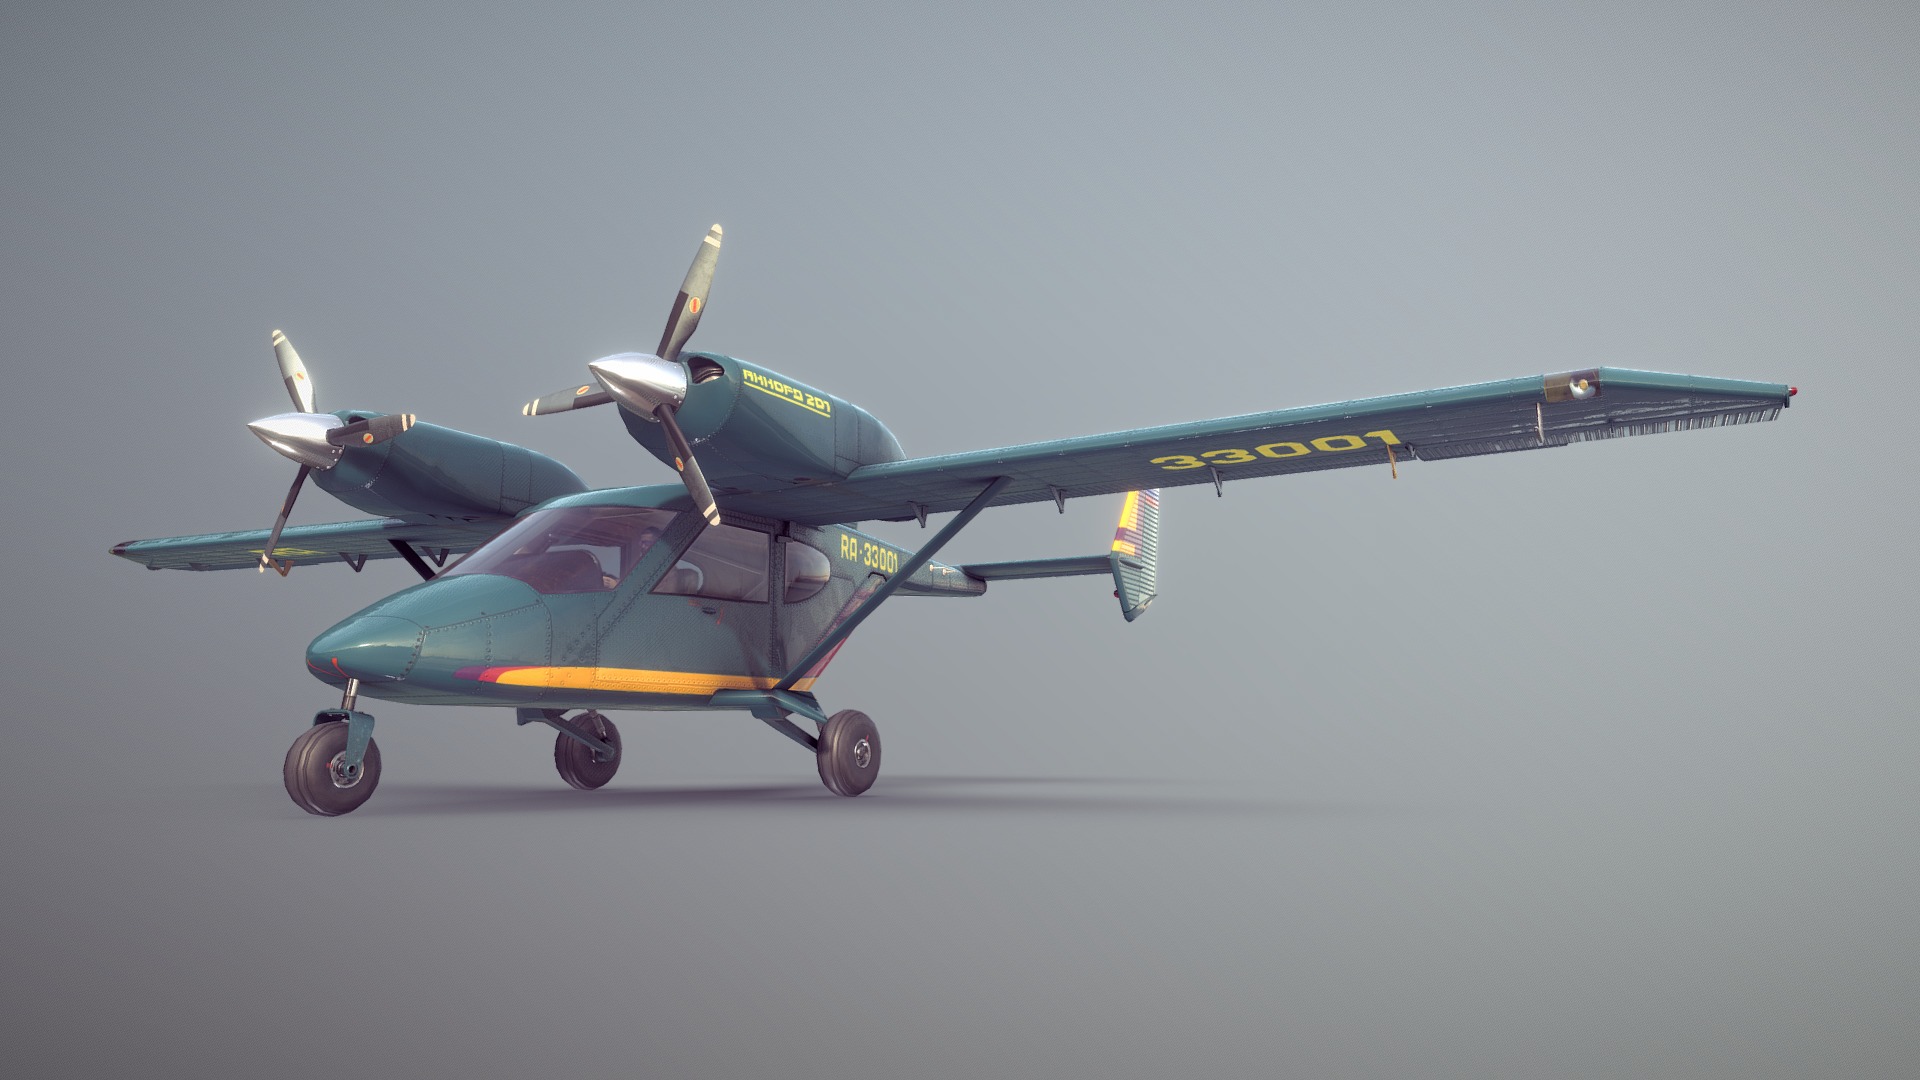 3D model Accord-201 GreenYellow Livery - This is a 3D model of the Accord-201 GreenYellow Livery. The 3D model is about a small airplane flying.